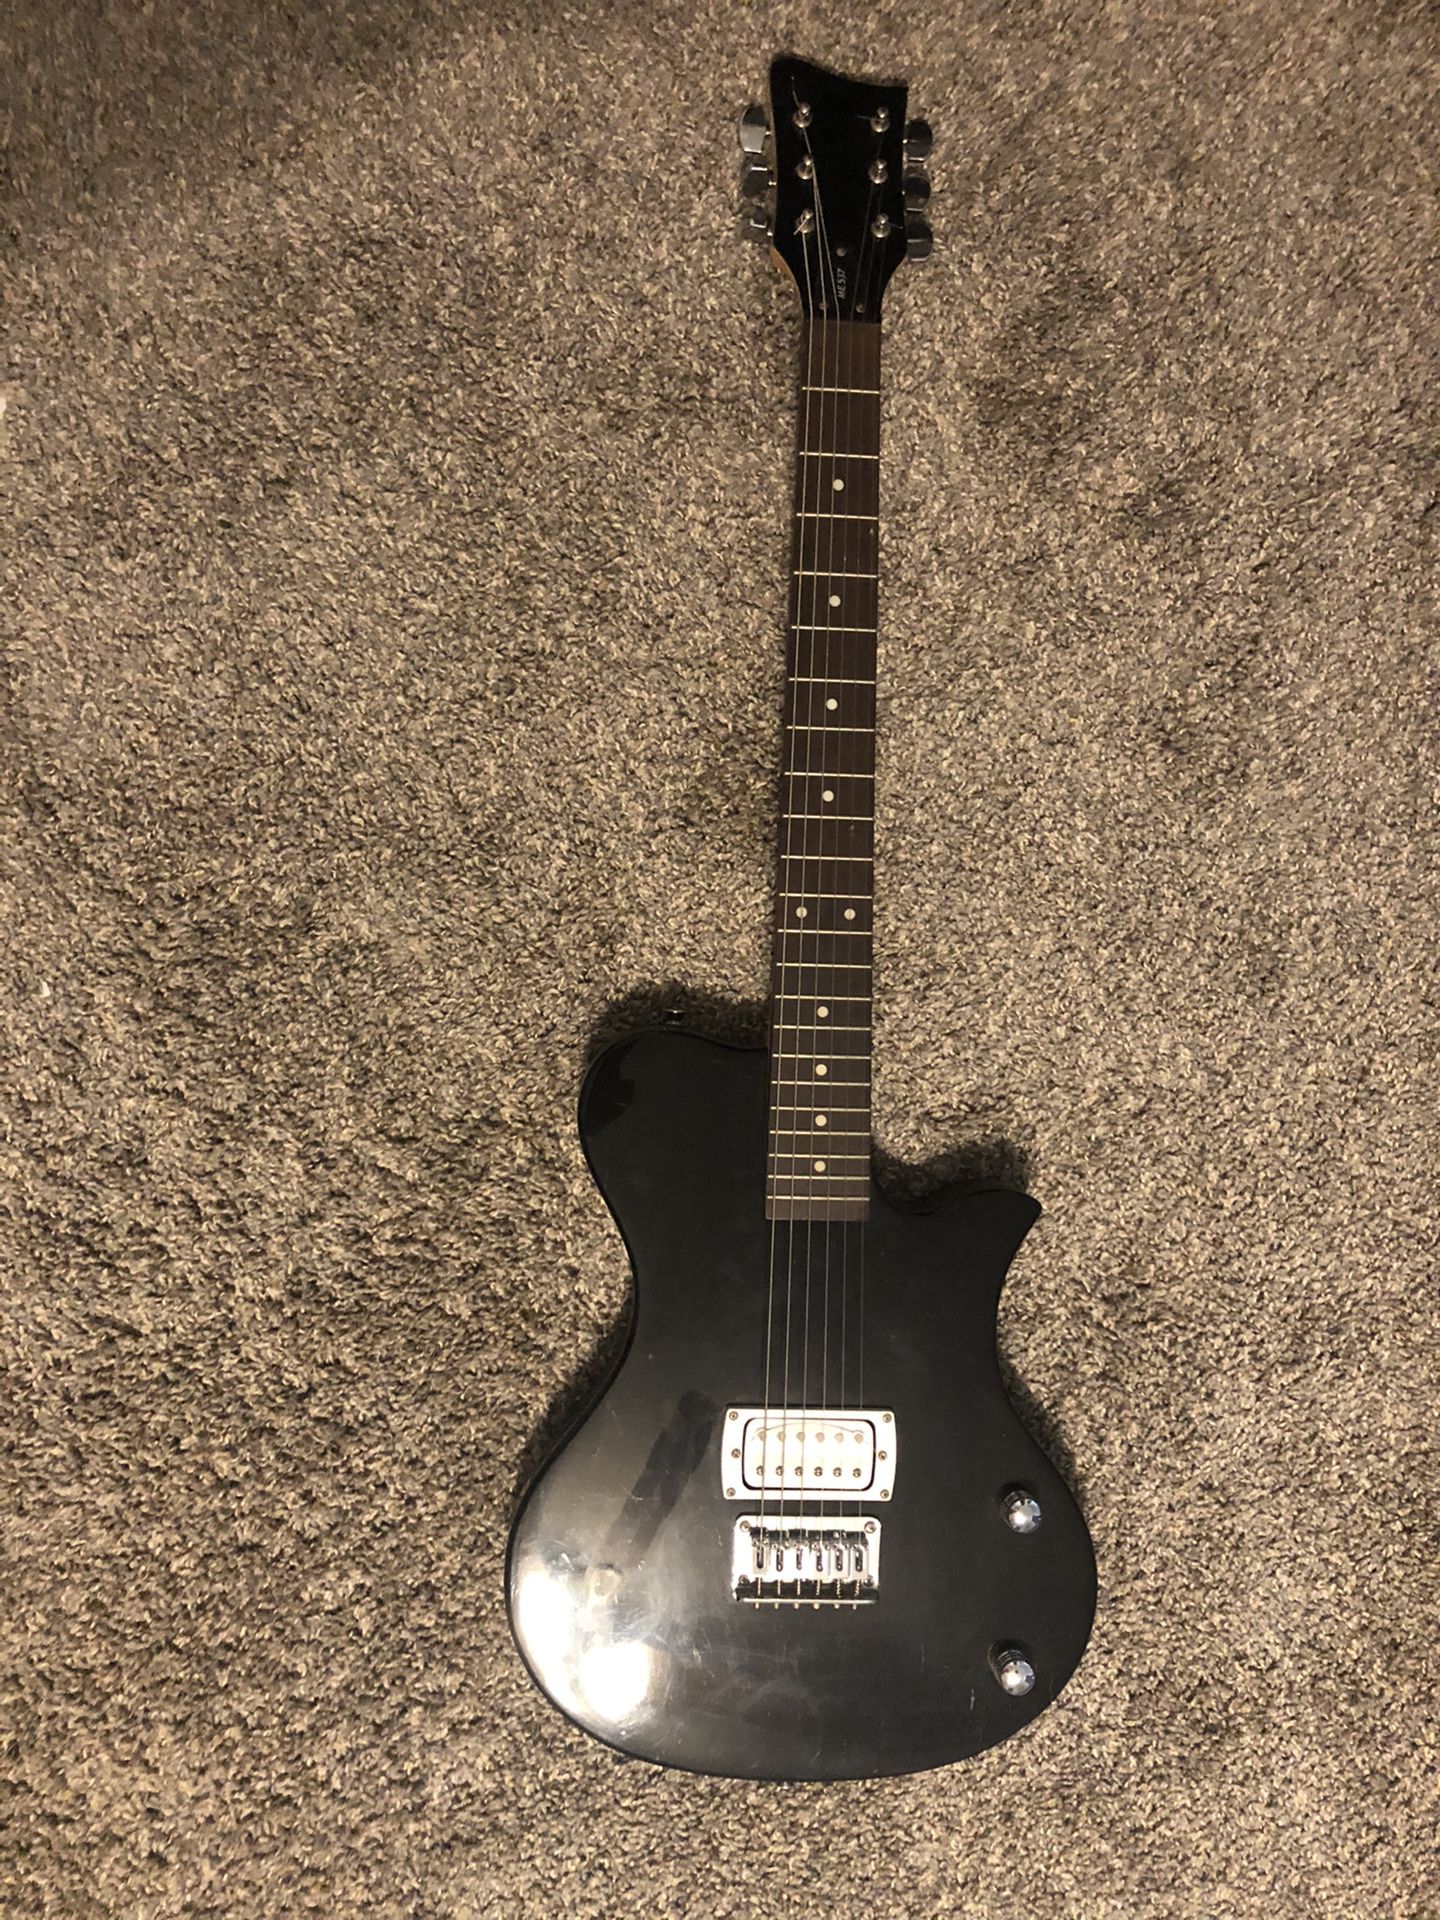 First Act ME-537 Electric Guitar